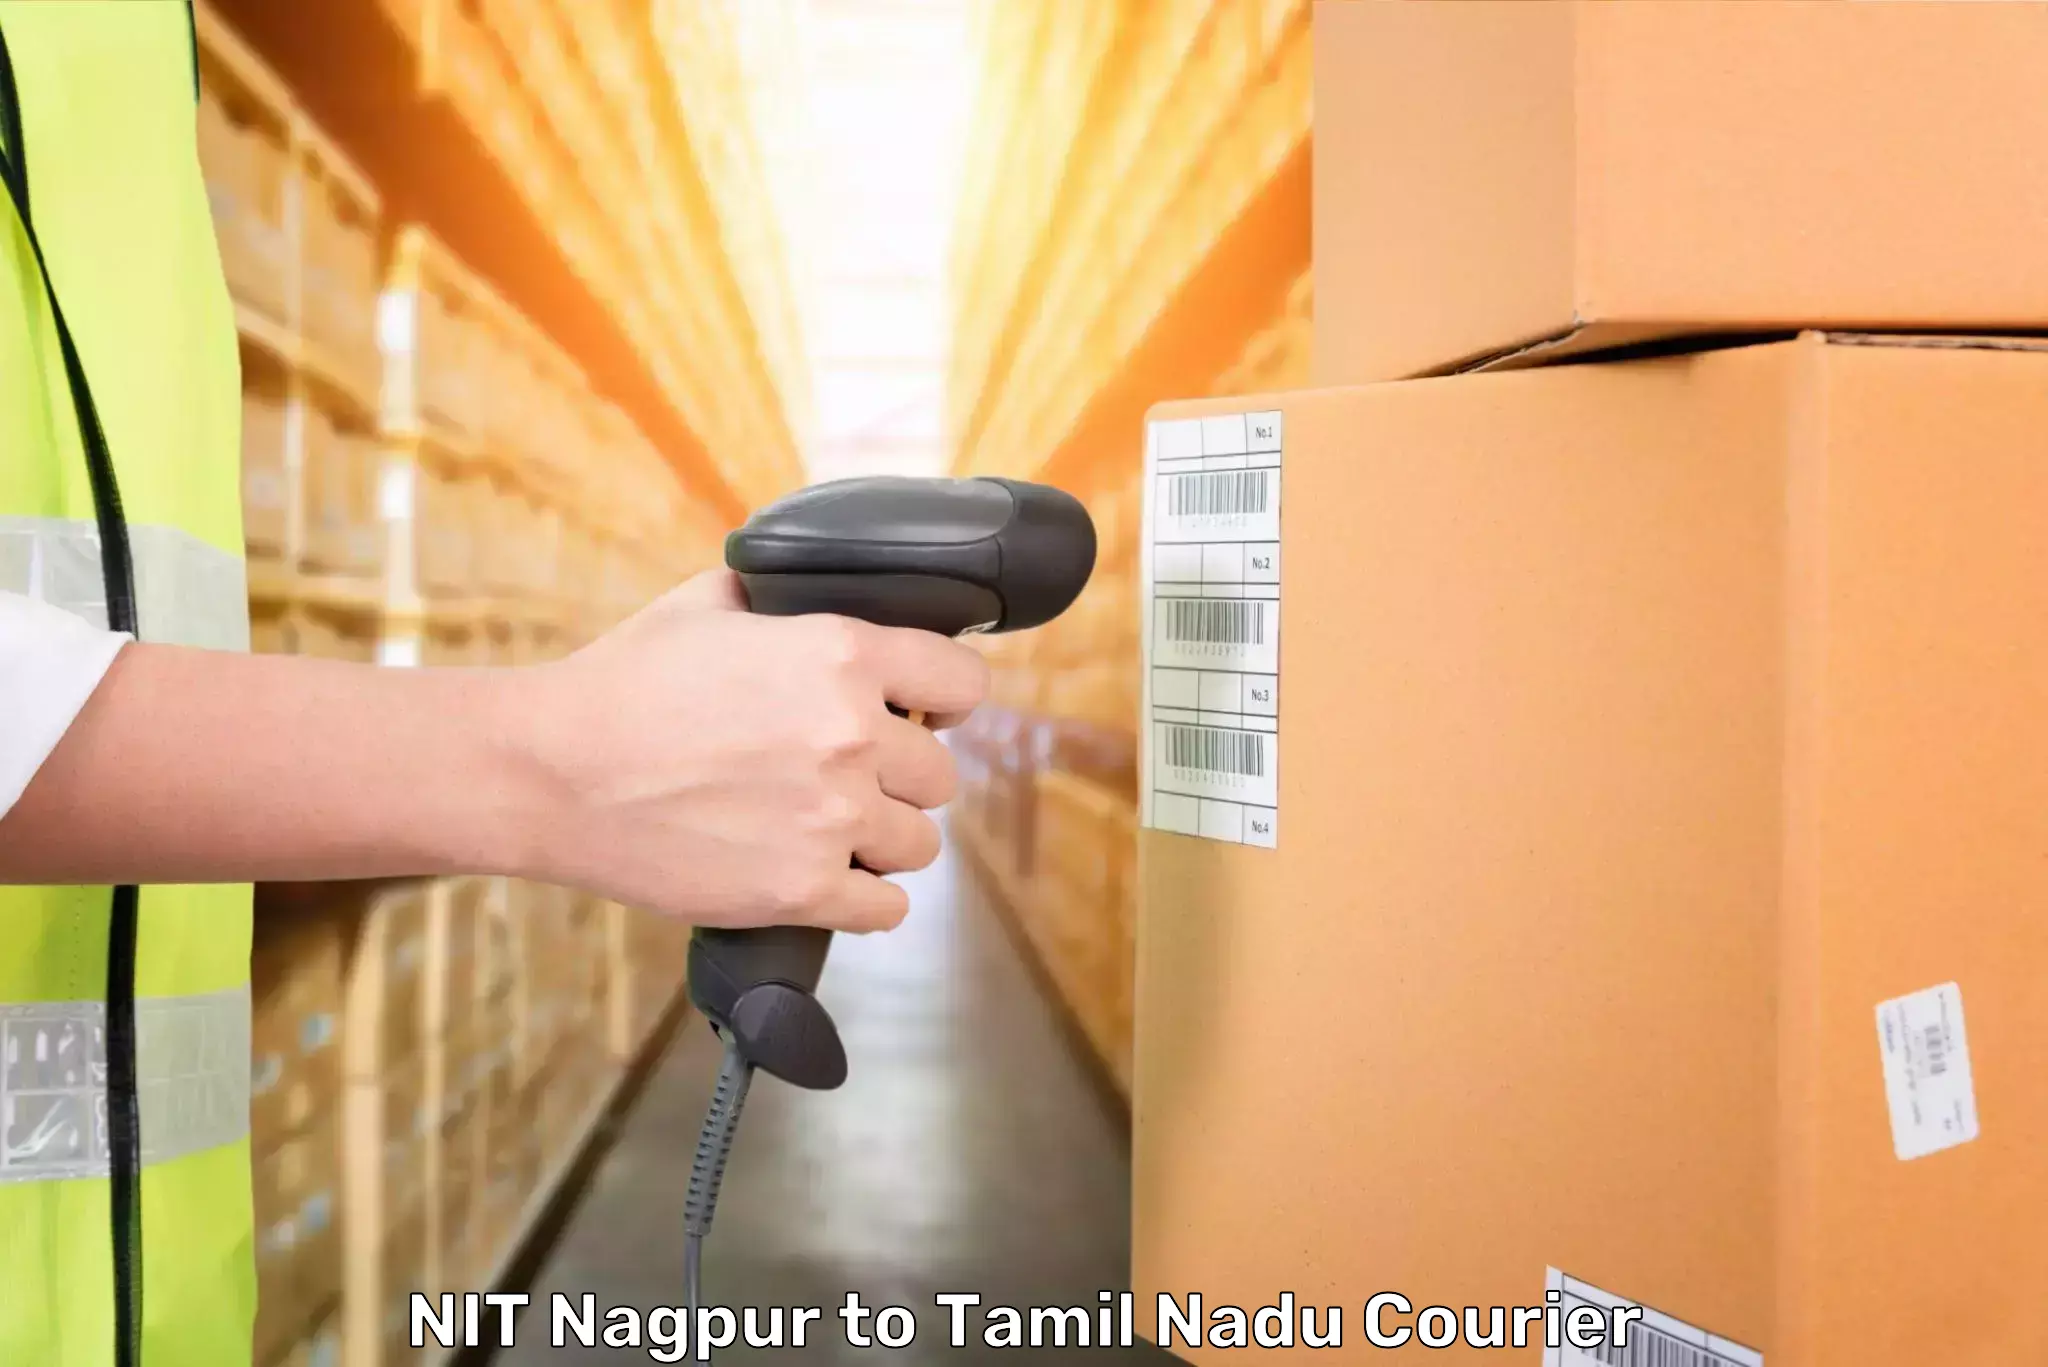 Personal effects shipping NIT Nagpur to Vedasandur